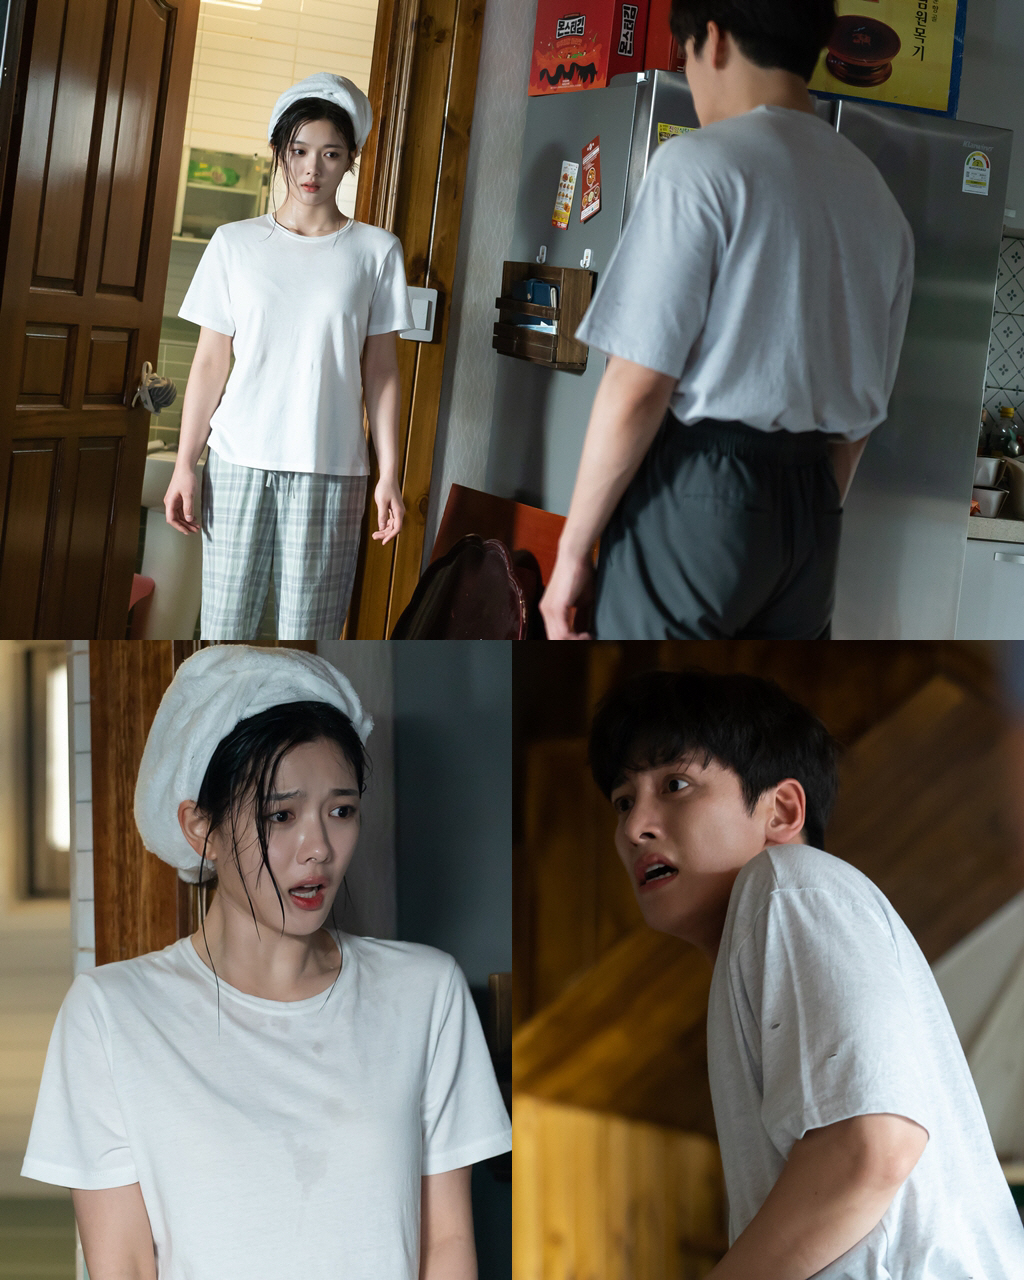 Convenience store morning star Ji Chang-wook, Kim Yoo-jung begins to live in a house.SBS Jackson Convenience store morning star captivated the house theater with a laughing bomb horror ending in the middle of summer heat.The figure of Kim Yoo-jung, who appeared in a white pajamas at the house of Choi Dae-heon (Ji Chang-wook), and Choi Dae-heon, who was surprised to see it, made a suddenly (a sudden atmosphere) horror movie and gave a laugh.The star was brought to this house by Choi Dae-heons mother, Gong Bun-hee (Kim Sun-young).In the 8th broadcast today (11th), the opposition to Choi Dae-heons association is depicted as Gong Bun-hee, who brings the star to his house with his ear.Choi Dae-heon, who is forced to break at the words of the mother of the absolute power of the family, and the opposite one house of the star who is impressed by the warm affection of Gongbunhee will start.In the meantime, ahead of the 8th broadcast, the production team of Convenience store morning star released Choi Dae-heon and Jeong-Sun star who lived in a house in earnest.However, the two people screaming at each others eyes raise expectations by foreseeing the weight of a house of people who are already in a hurry.Choi Dae-heon and Jung Sae-sung in the public photos are accidentally encountered in the house.Standing with a towel on his head, the star is screaming frozen at something, and Choi Dae-heon is also looking like a horny mountain after last night.Choi Dae-heons expression, which seems to be embarrassed as if an emergency occurred, amplifies the question of what happened and why they are surprised to see each other.Choi Dae-heon and Jung-Sun star live together in a house and face unexpected moments.Ji Chang-wook and Kim Yoo-jung, who boast of Tikitaka Chemi even if they are attached, are adding to the expectation of their breathing as they become a house.Here, the appearance of the Choi Dae-heon family, armed with their own personality, will also give a warm and unforgettable fun.Choi Dae-heon and the scream of the star are seen in the 8th episode of SBS Jackson Convenience store star which is broadcasted at 10 pm today (11th).